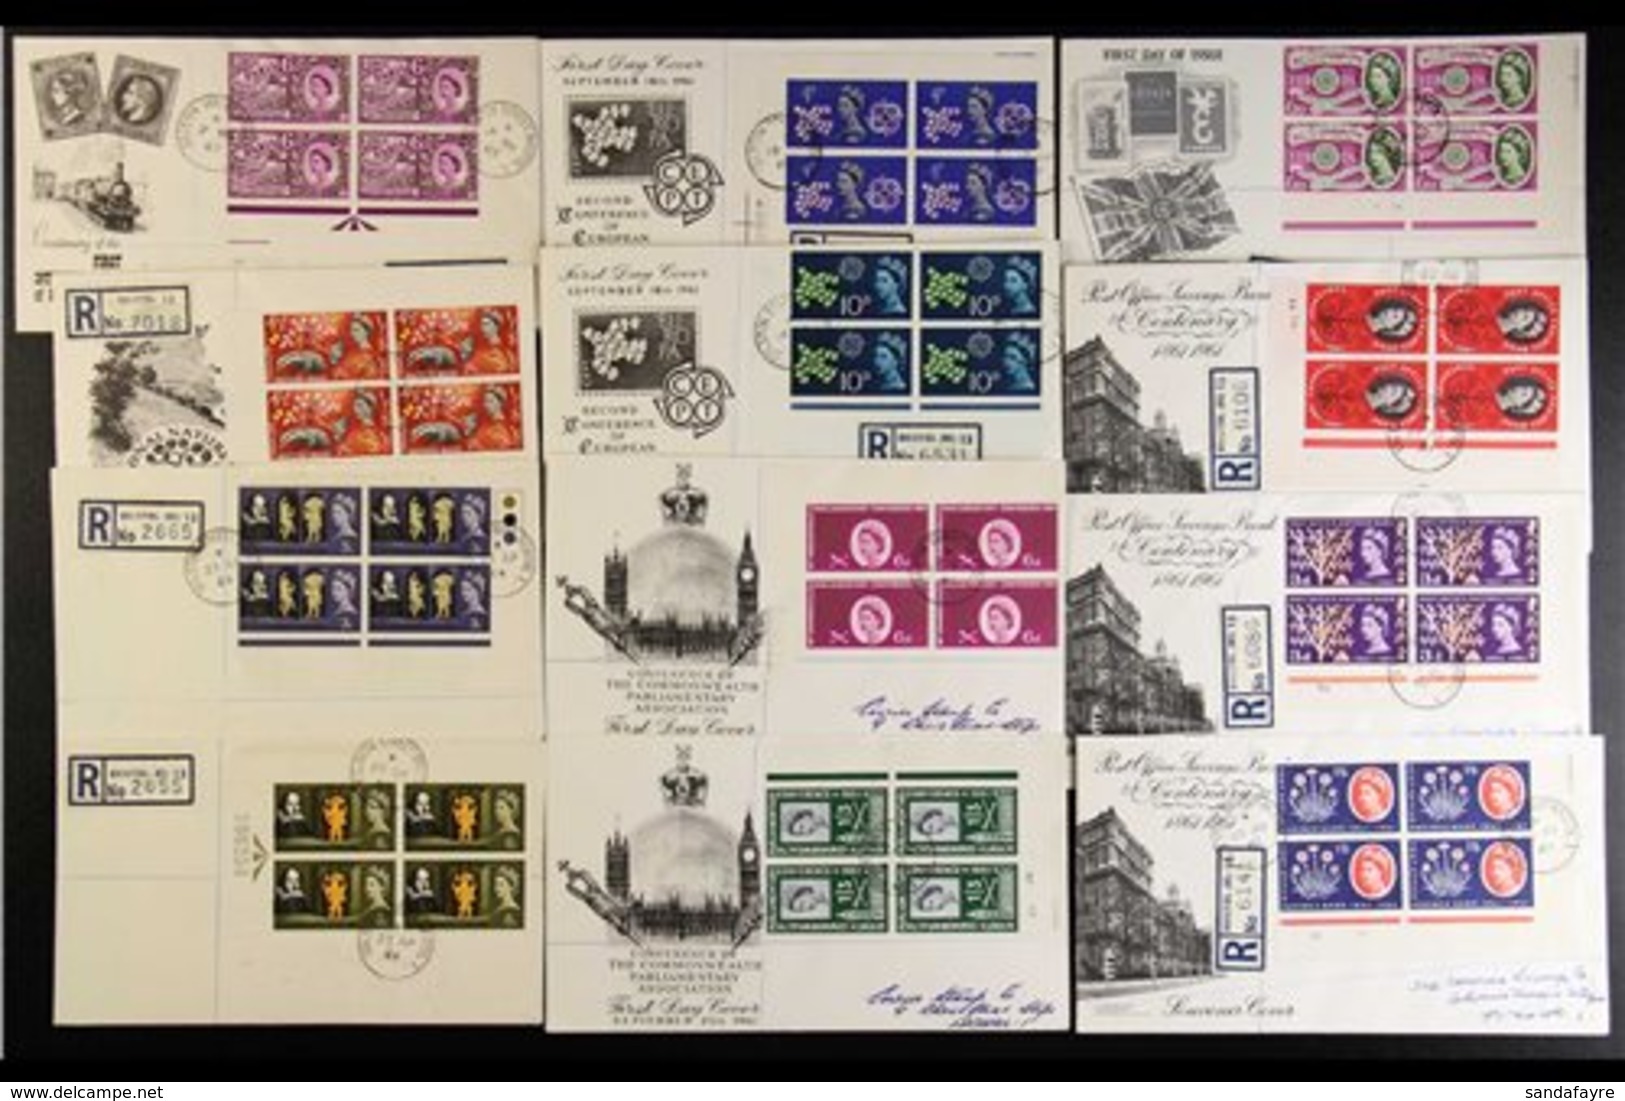 1960-6 BLOCKS OF FOUR On Illustrated FDCs, We See 1960 Europa, 1961 PO Savings Bank, CEPT, Parliamentary Conference, 196 - FDC